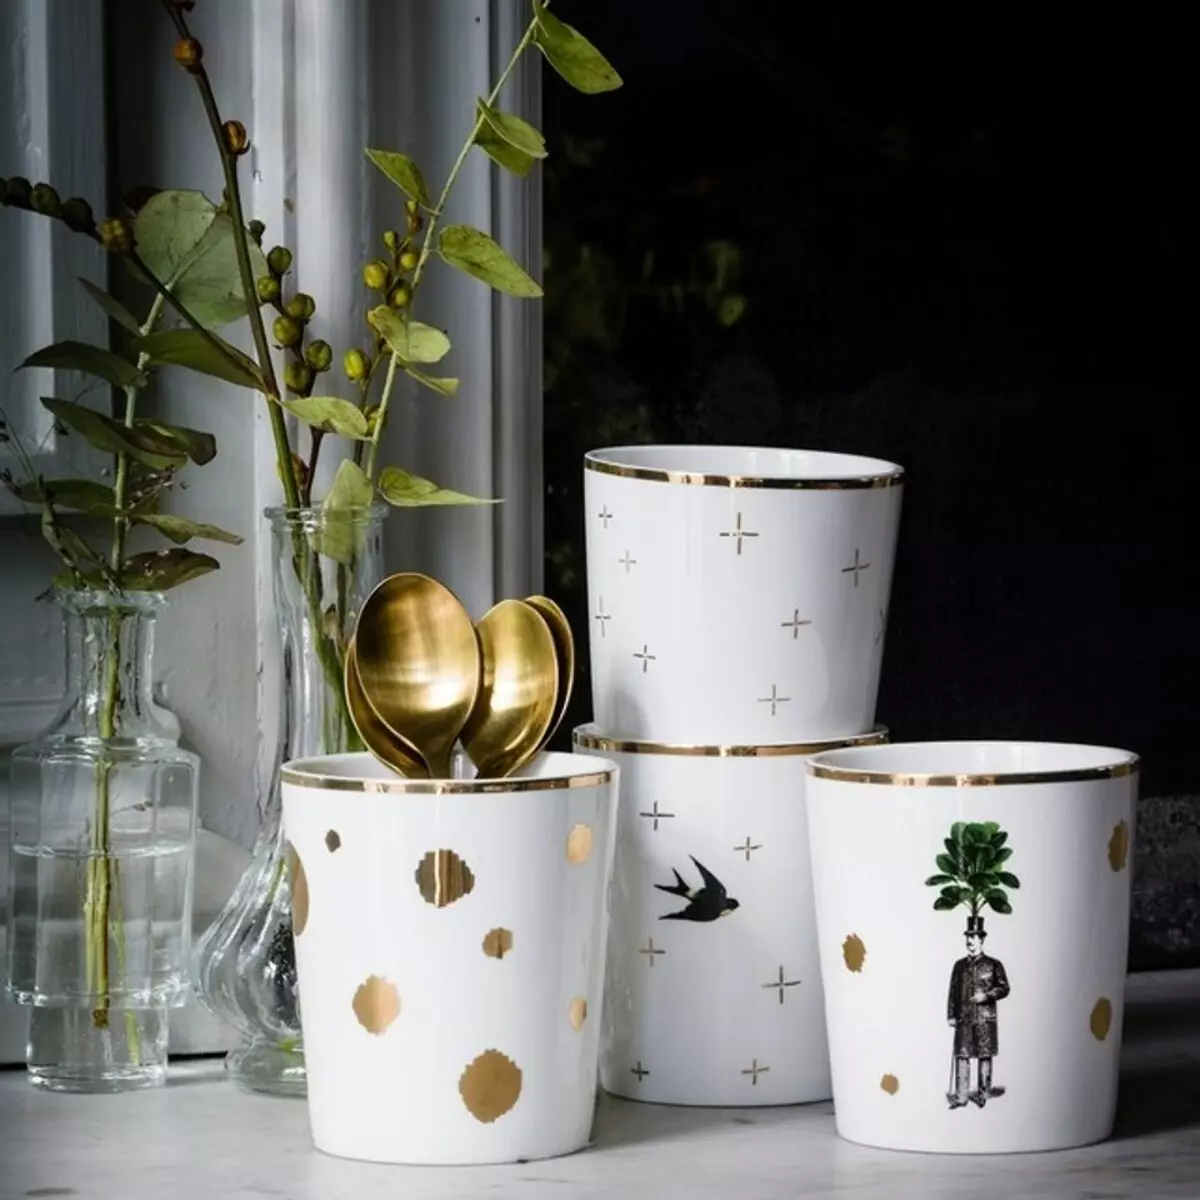 13 ideas of interior gifts in Scandinavian style 10092_2